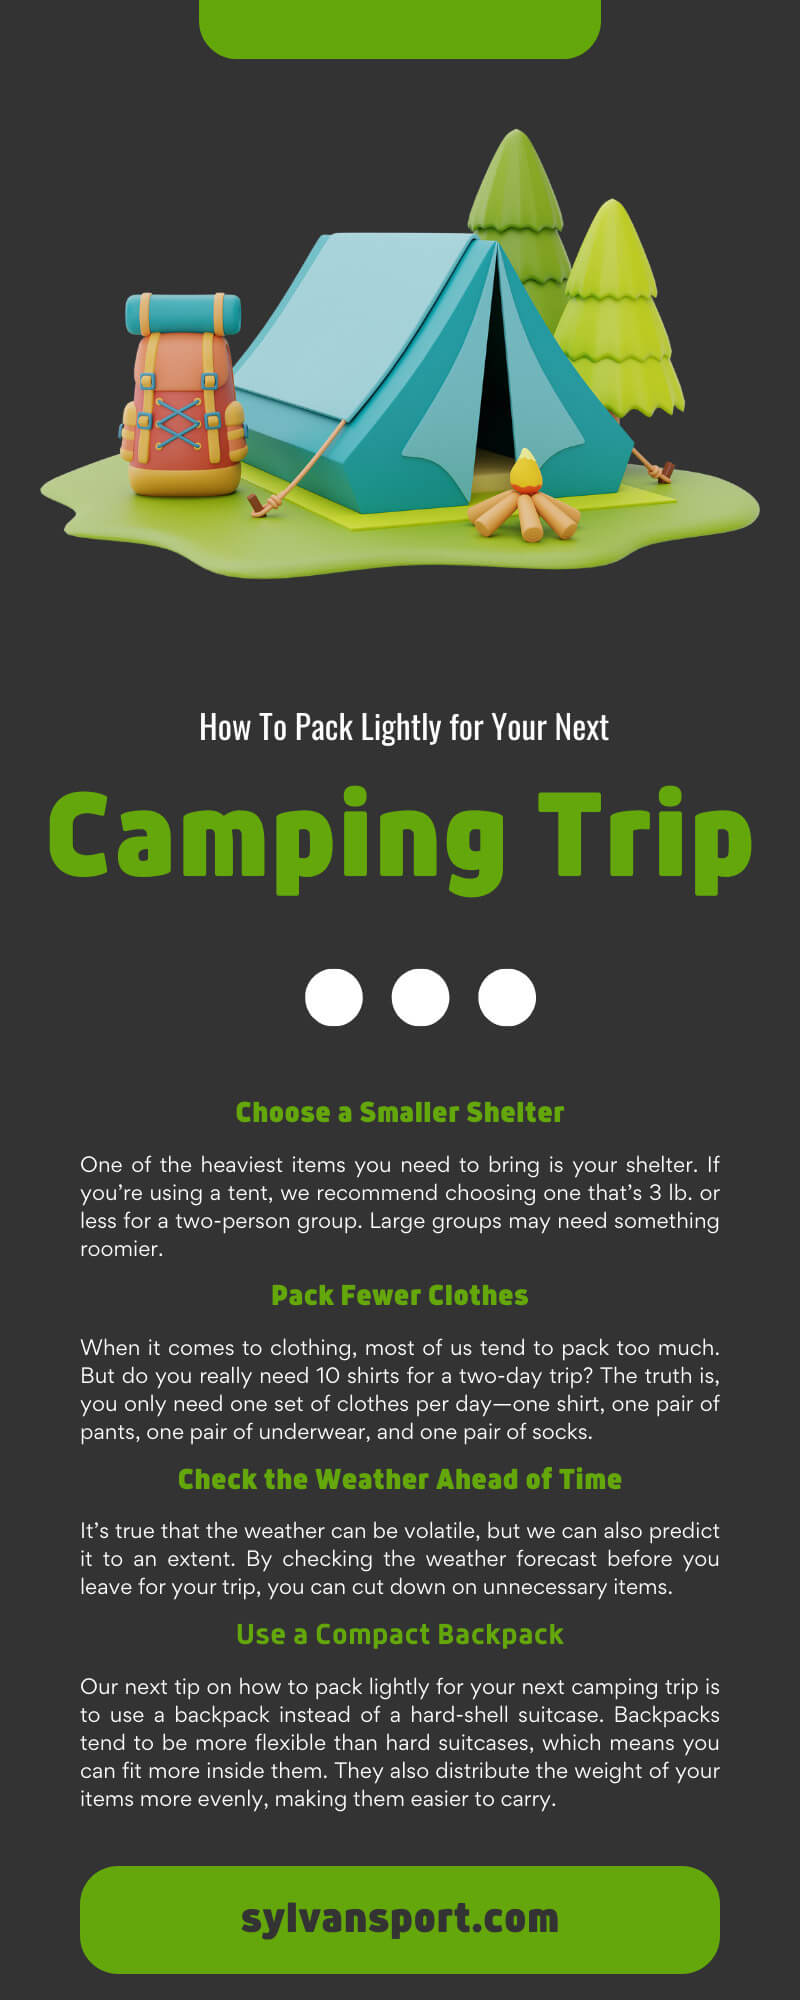 10 Ways to Use Glad Press'n Seal on Your Next Camping Trip